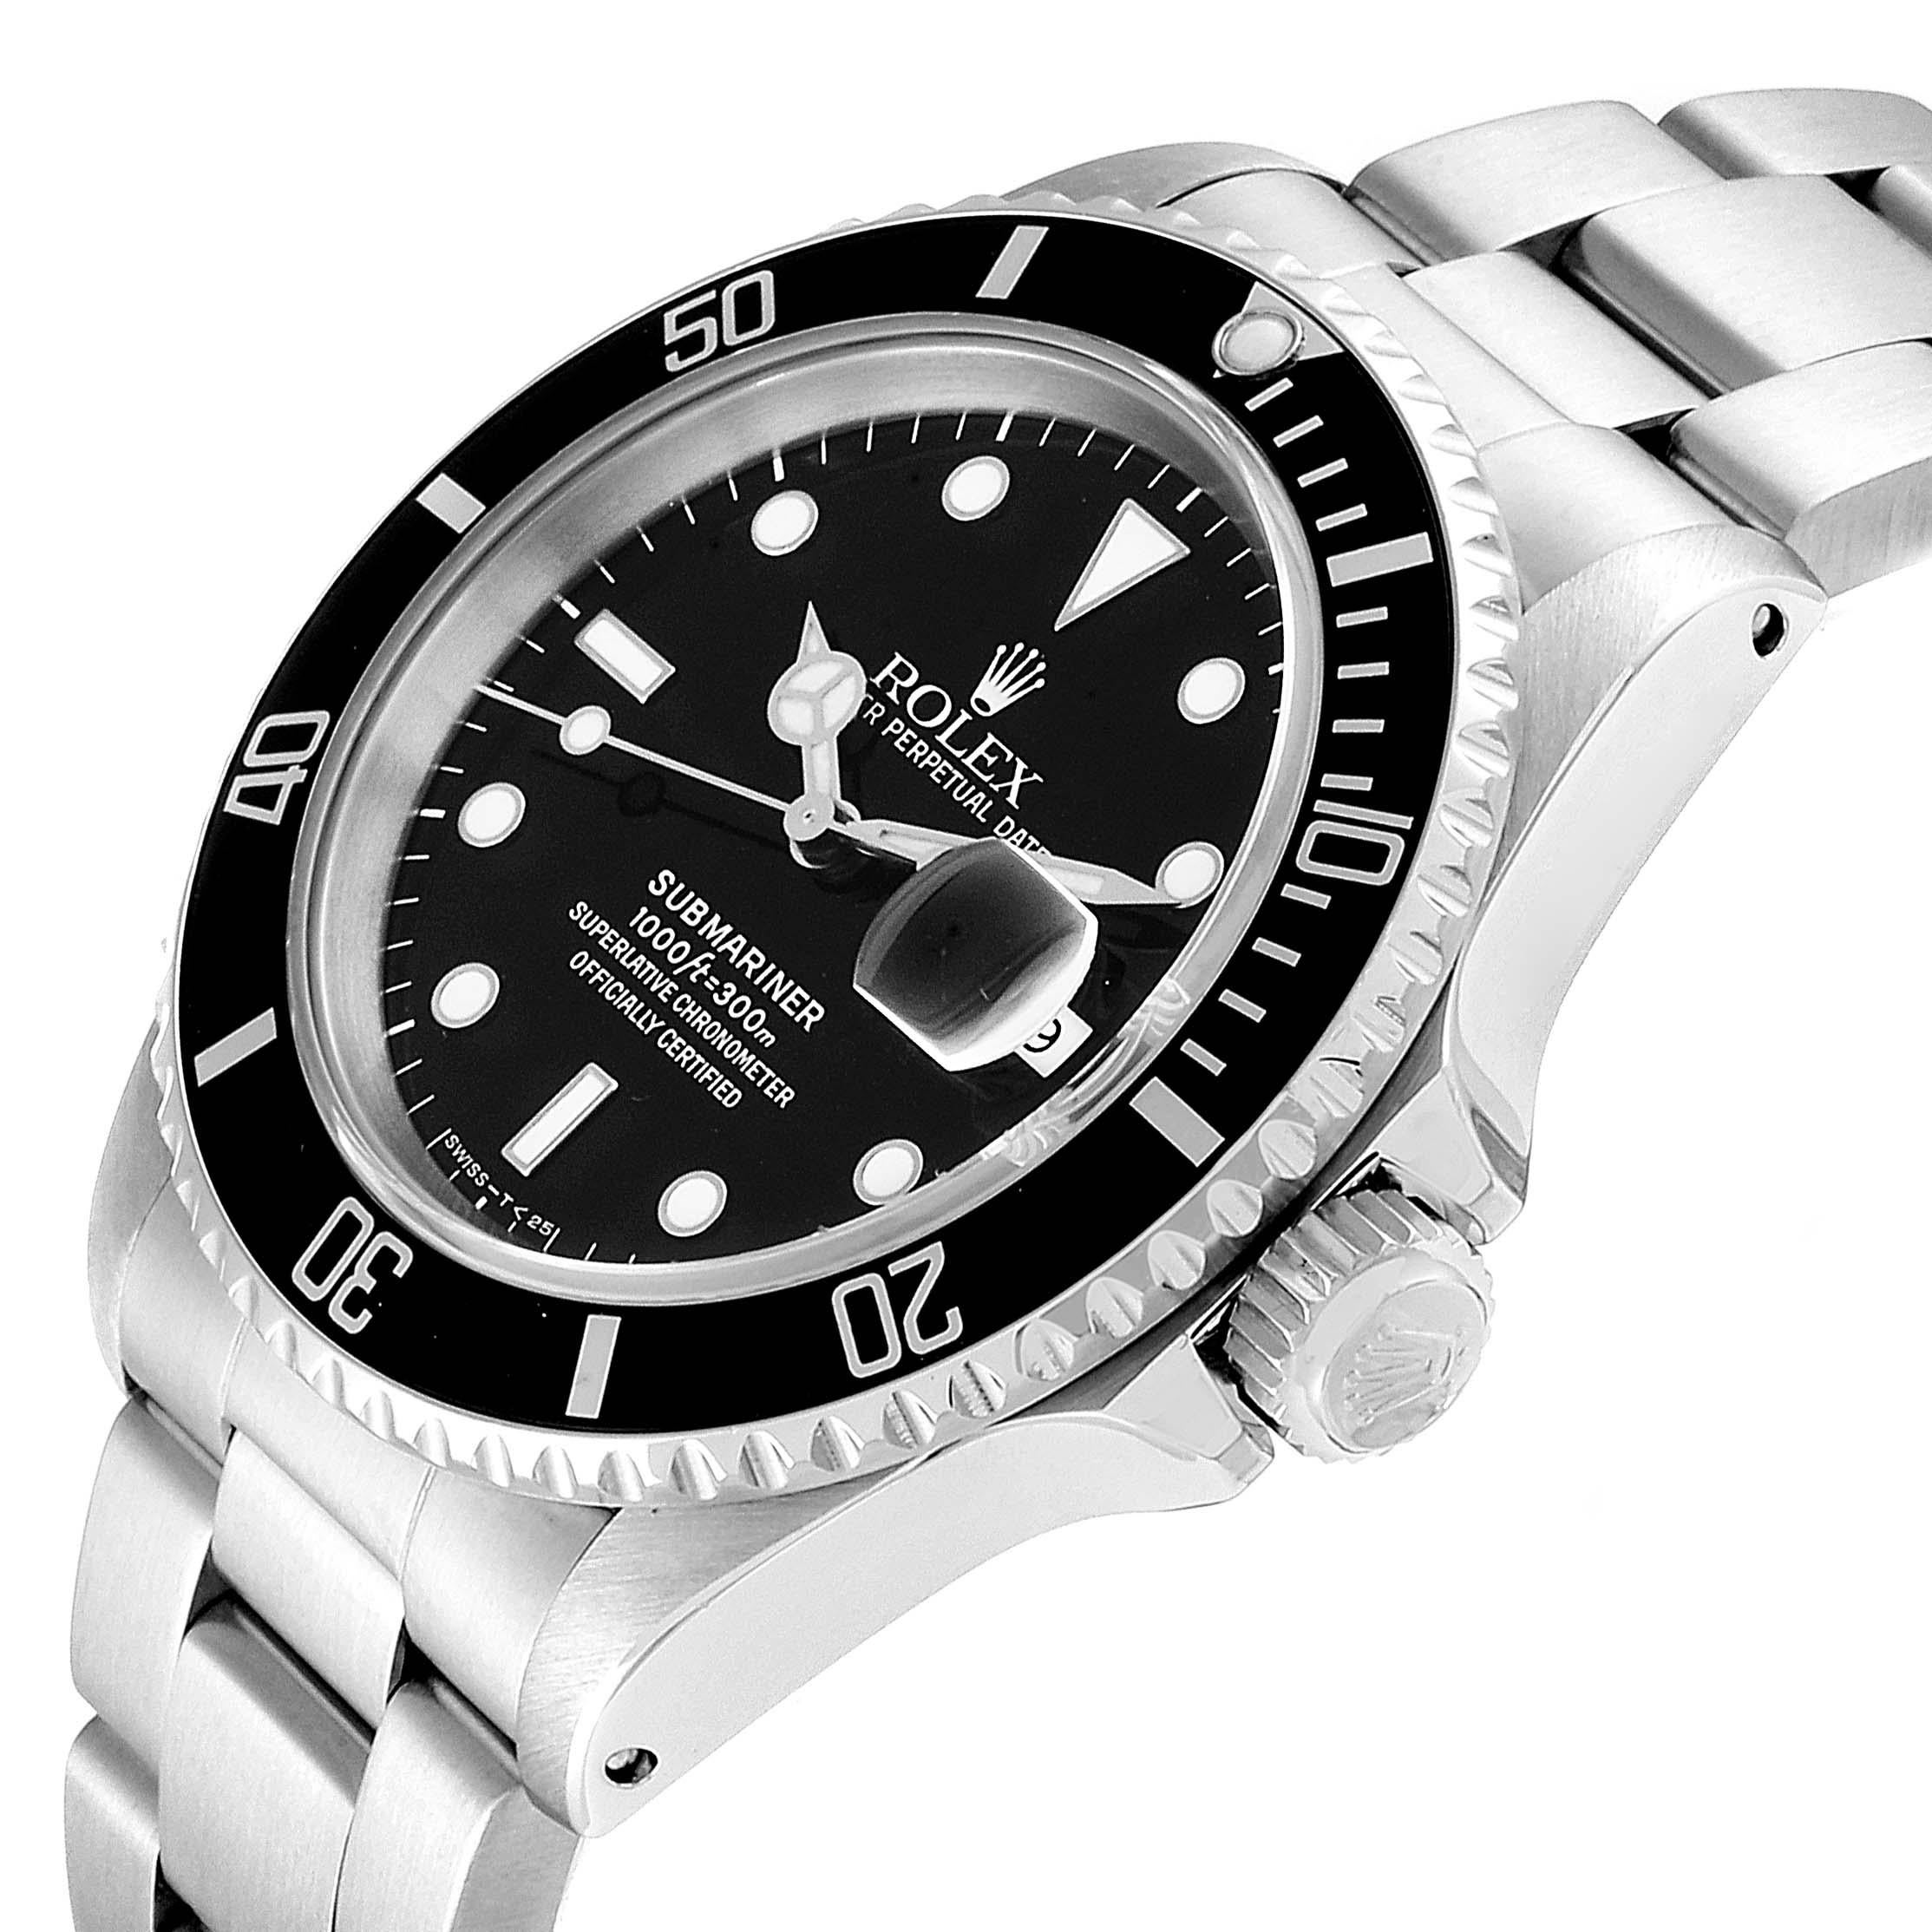 Rolex Submariner Date Stainless Steel Men's Watch 16610 Box Papers 2